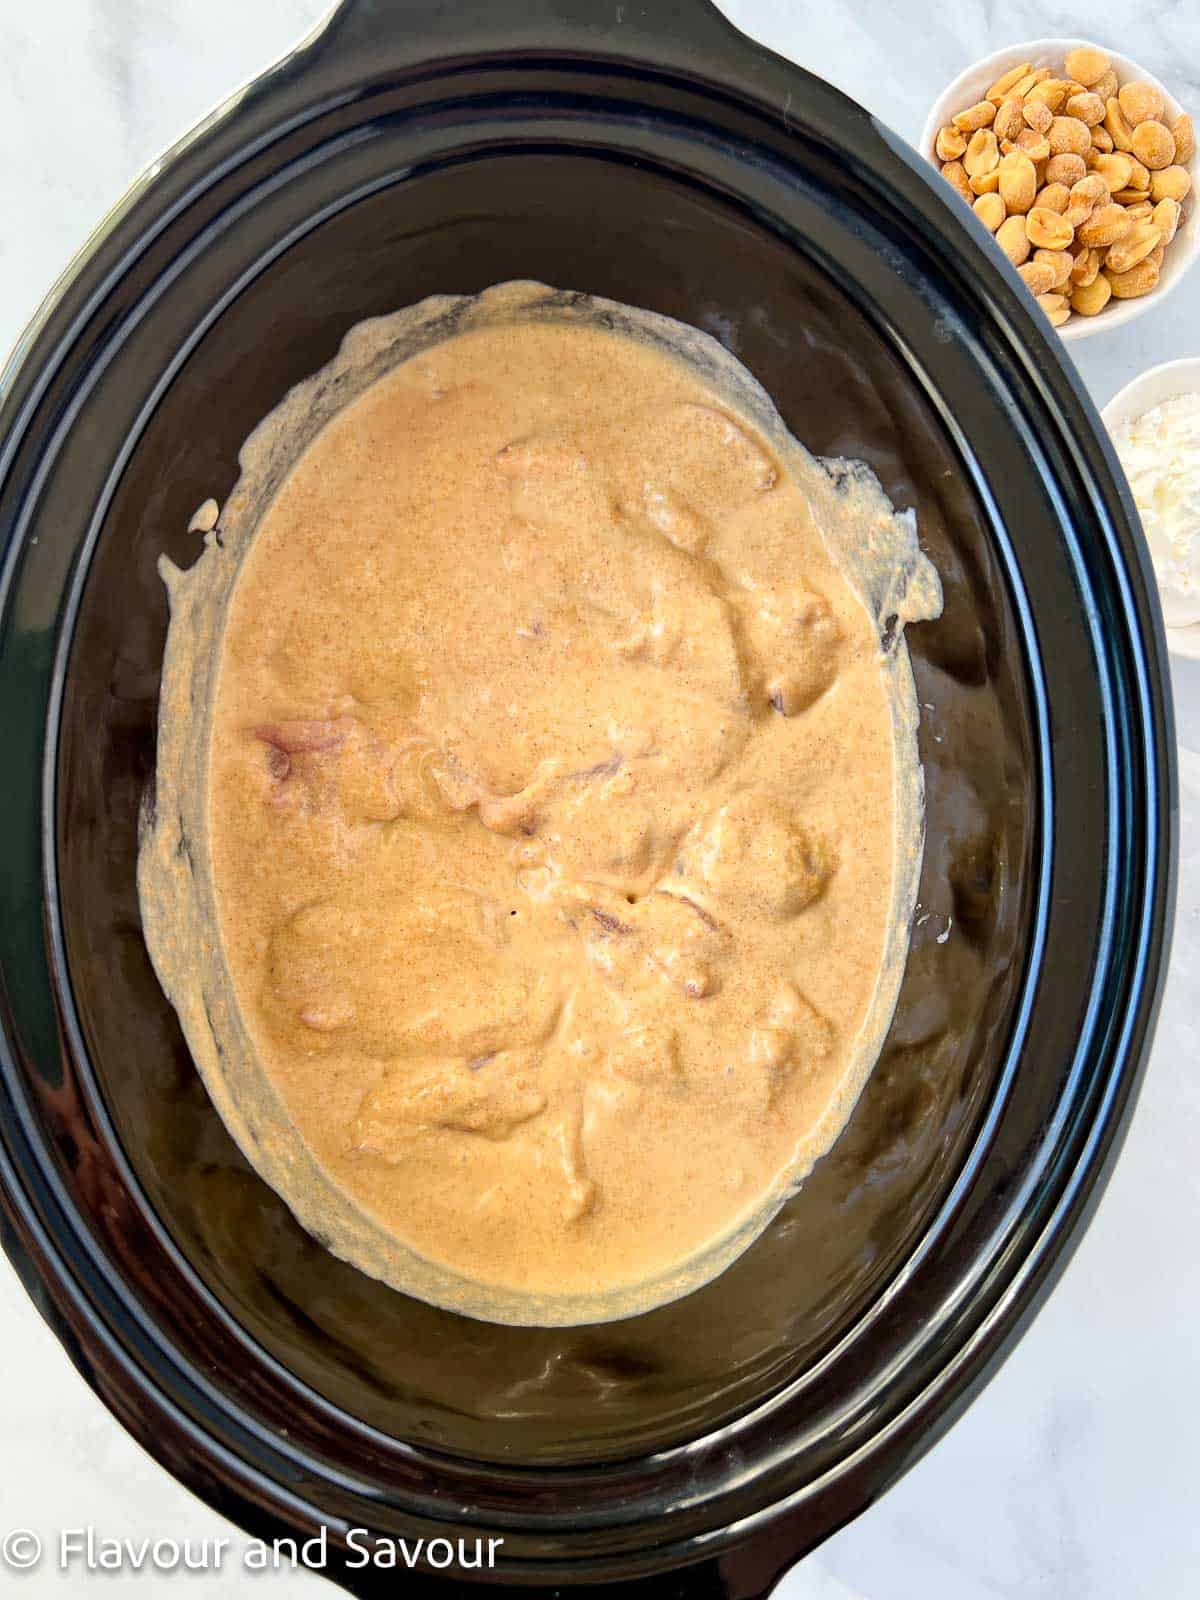 Adding chicken pieces to peanut sauce in the bowl of a slow cooker.